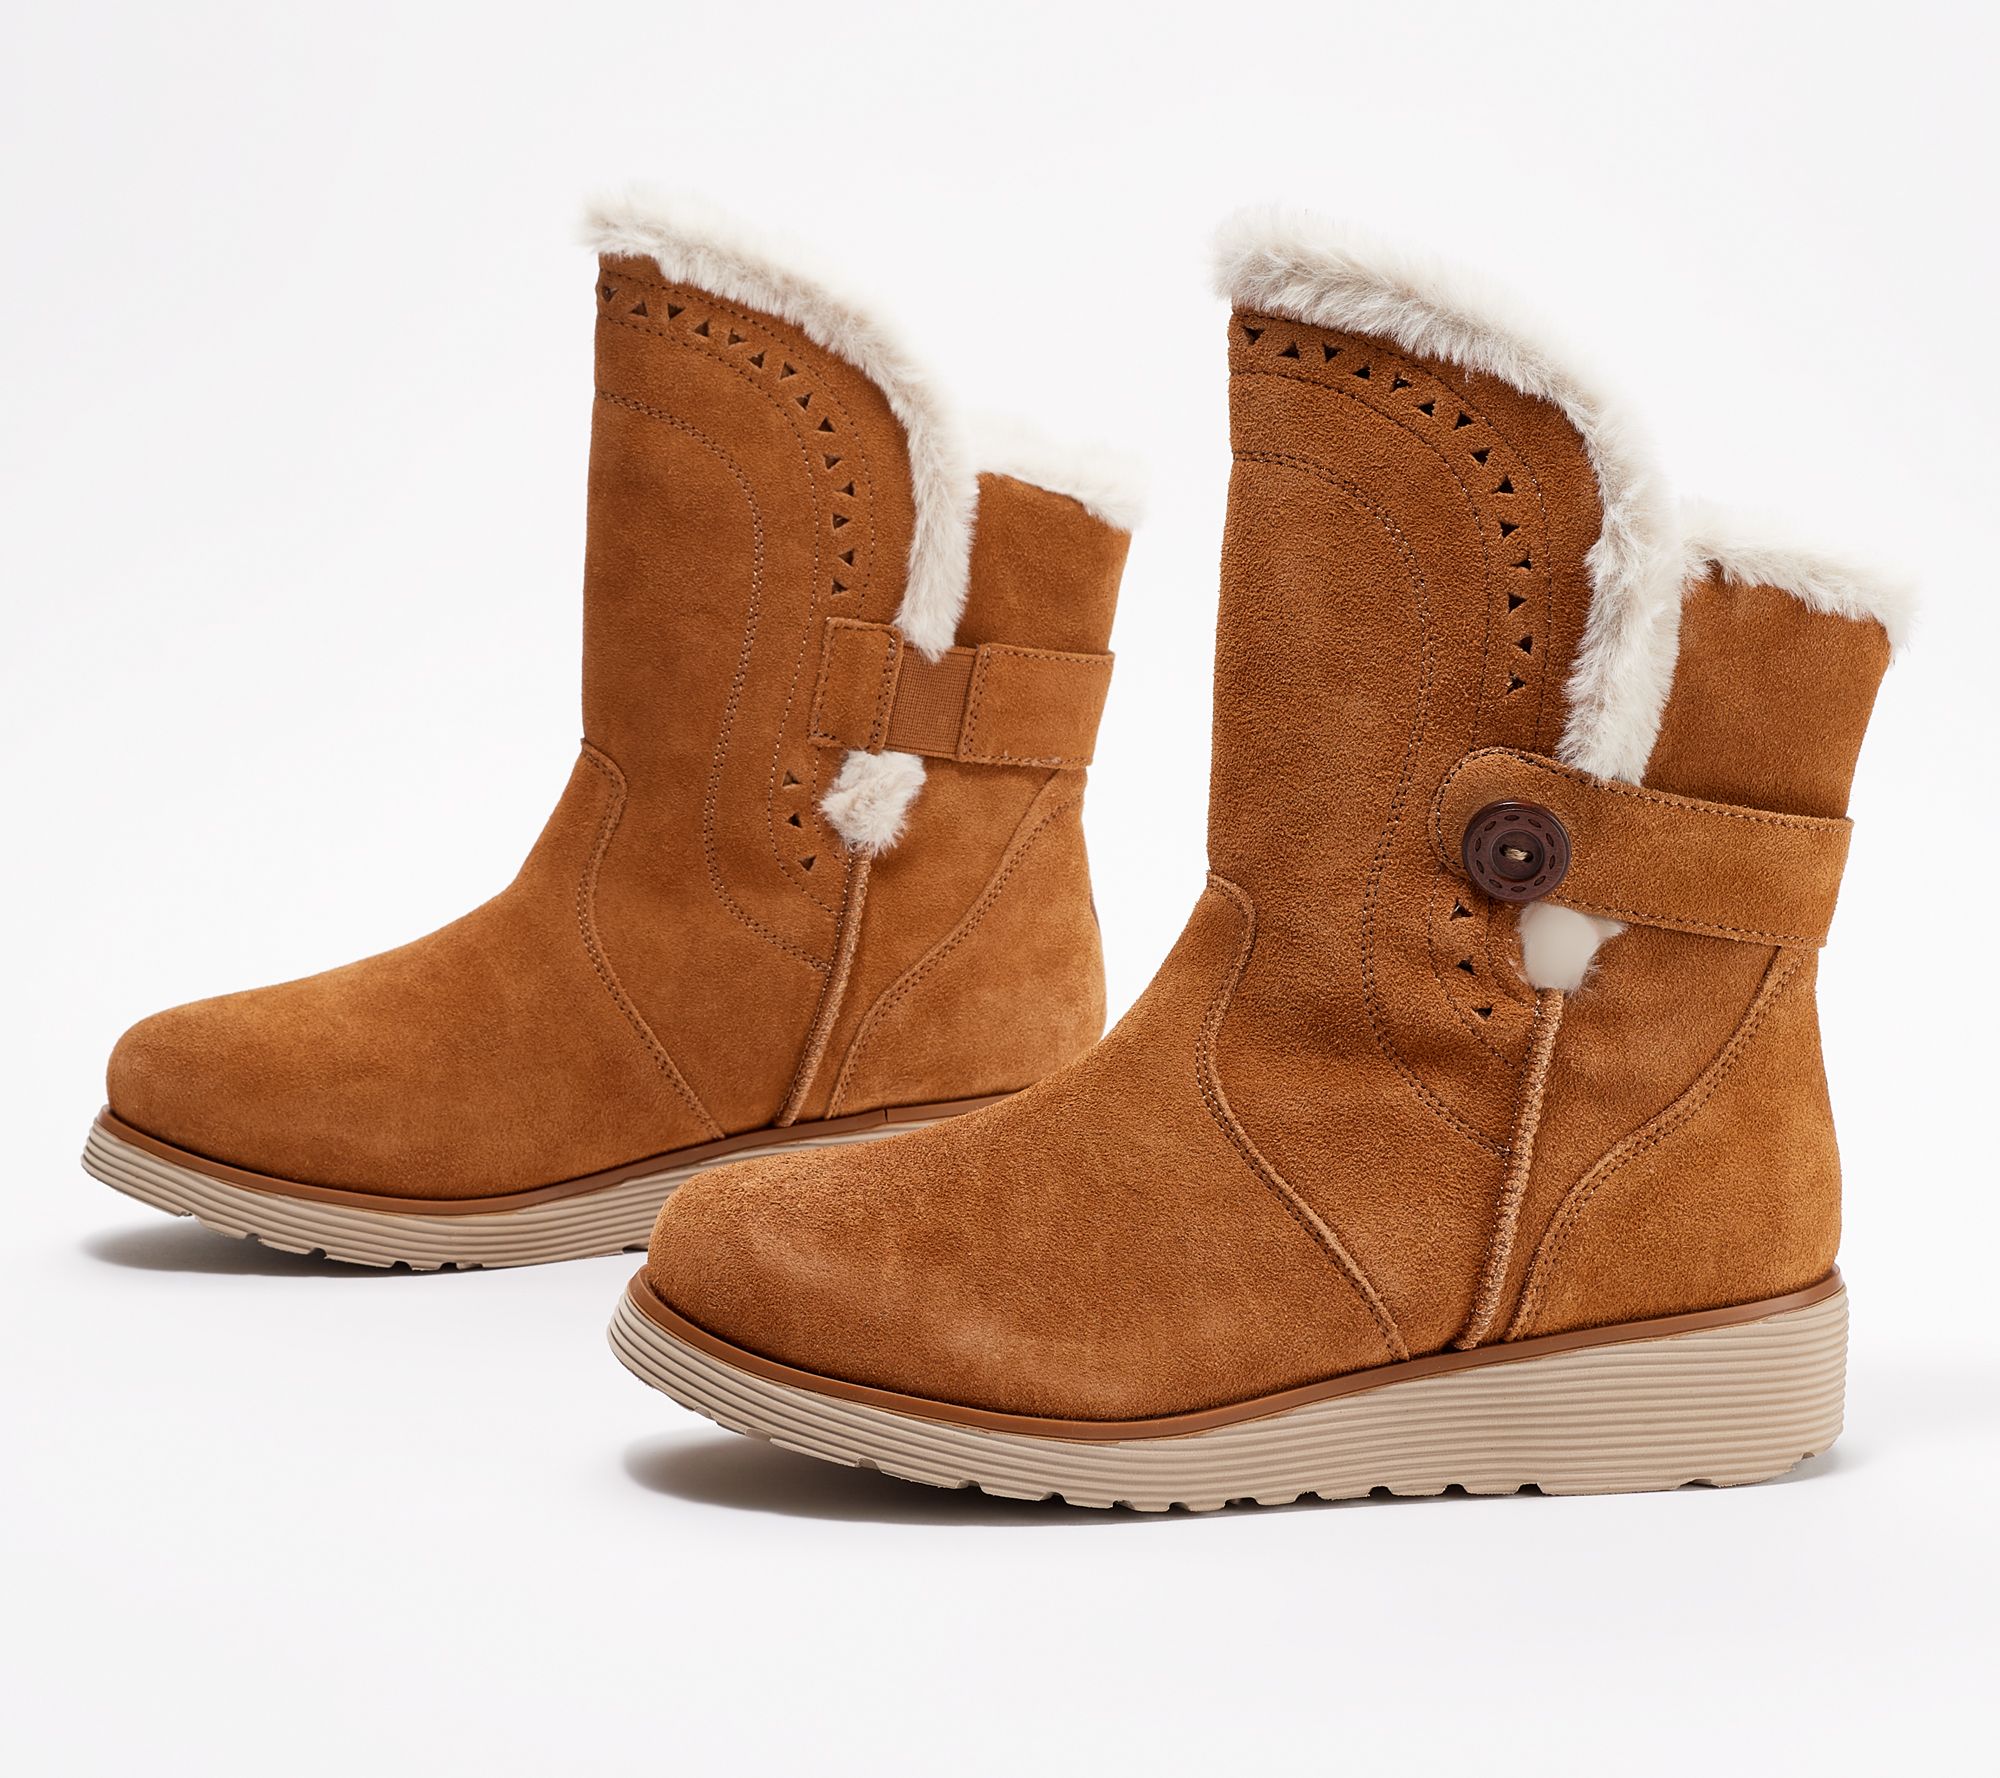 skechers suede boots Online Shopping -